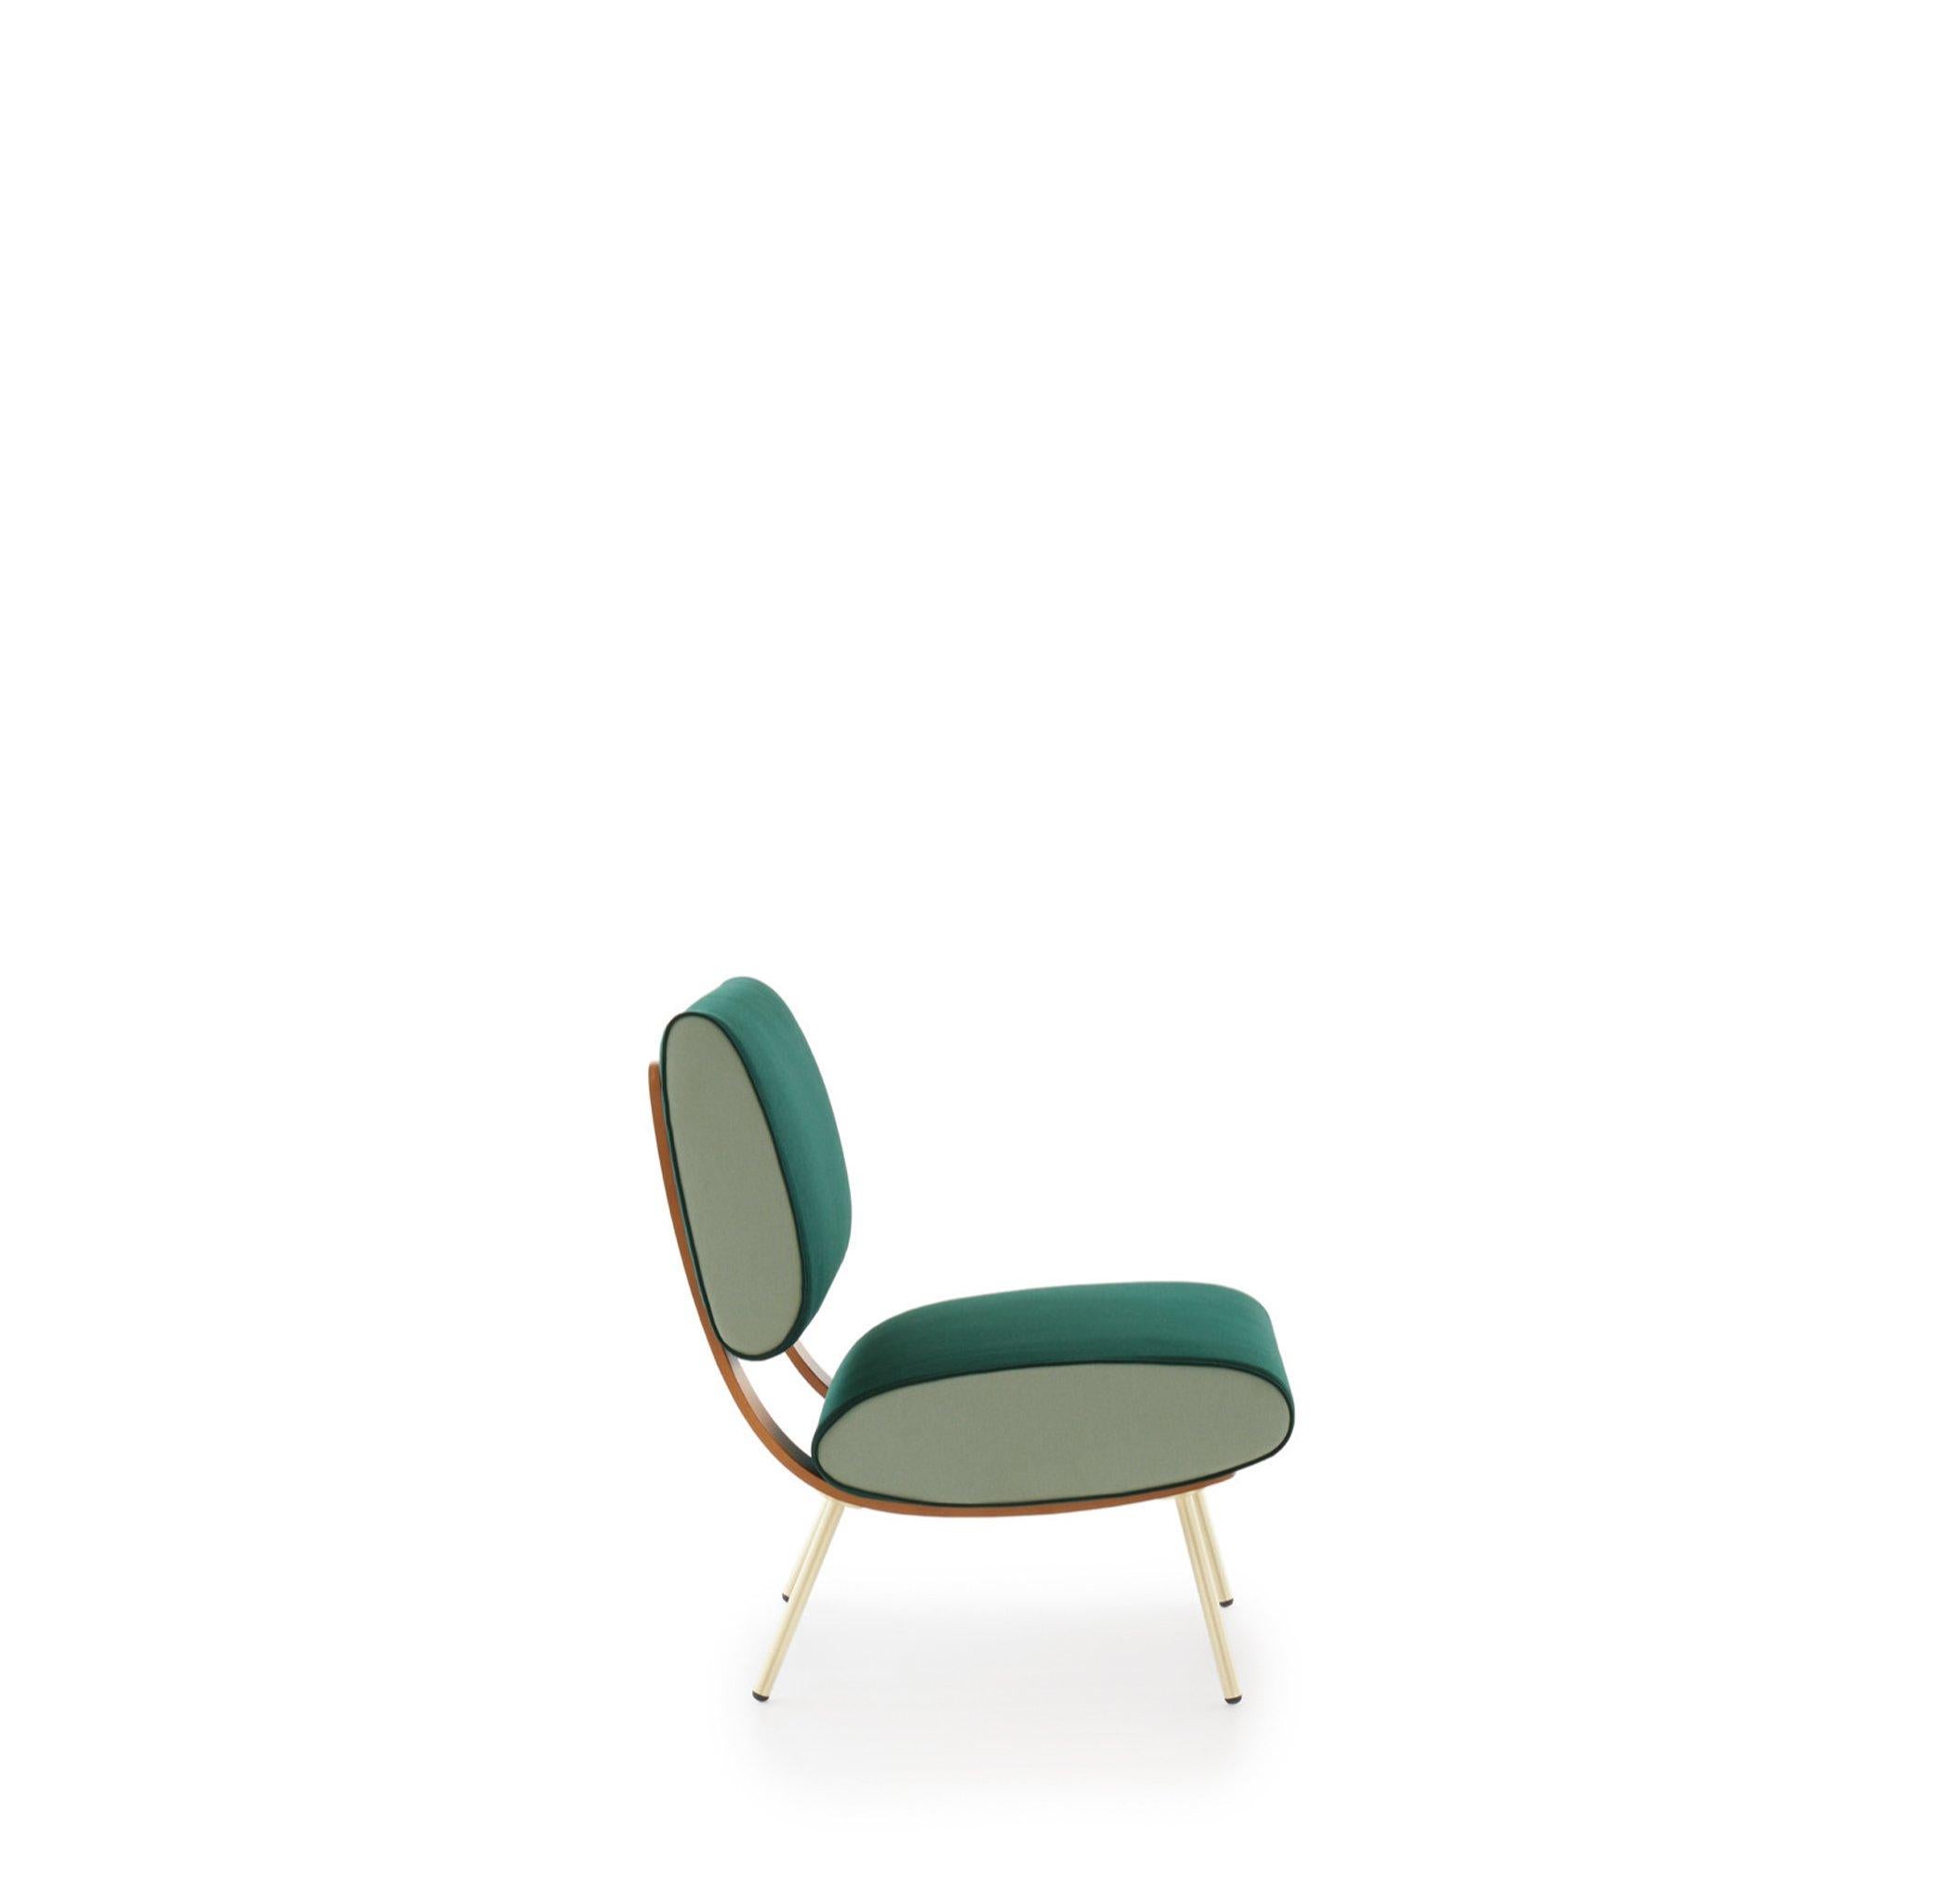 Armchair in Leather by Gio Ponti. Expert-crafted in Italy exclusively by Molteni&C.

The end of the Second World War ushered in an era of creativity and it was no different for furniture design. This rounded chair harkens back to its original design